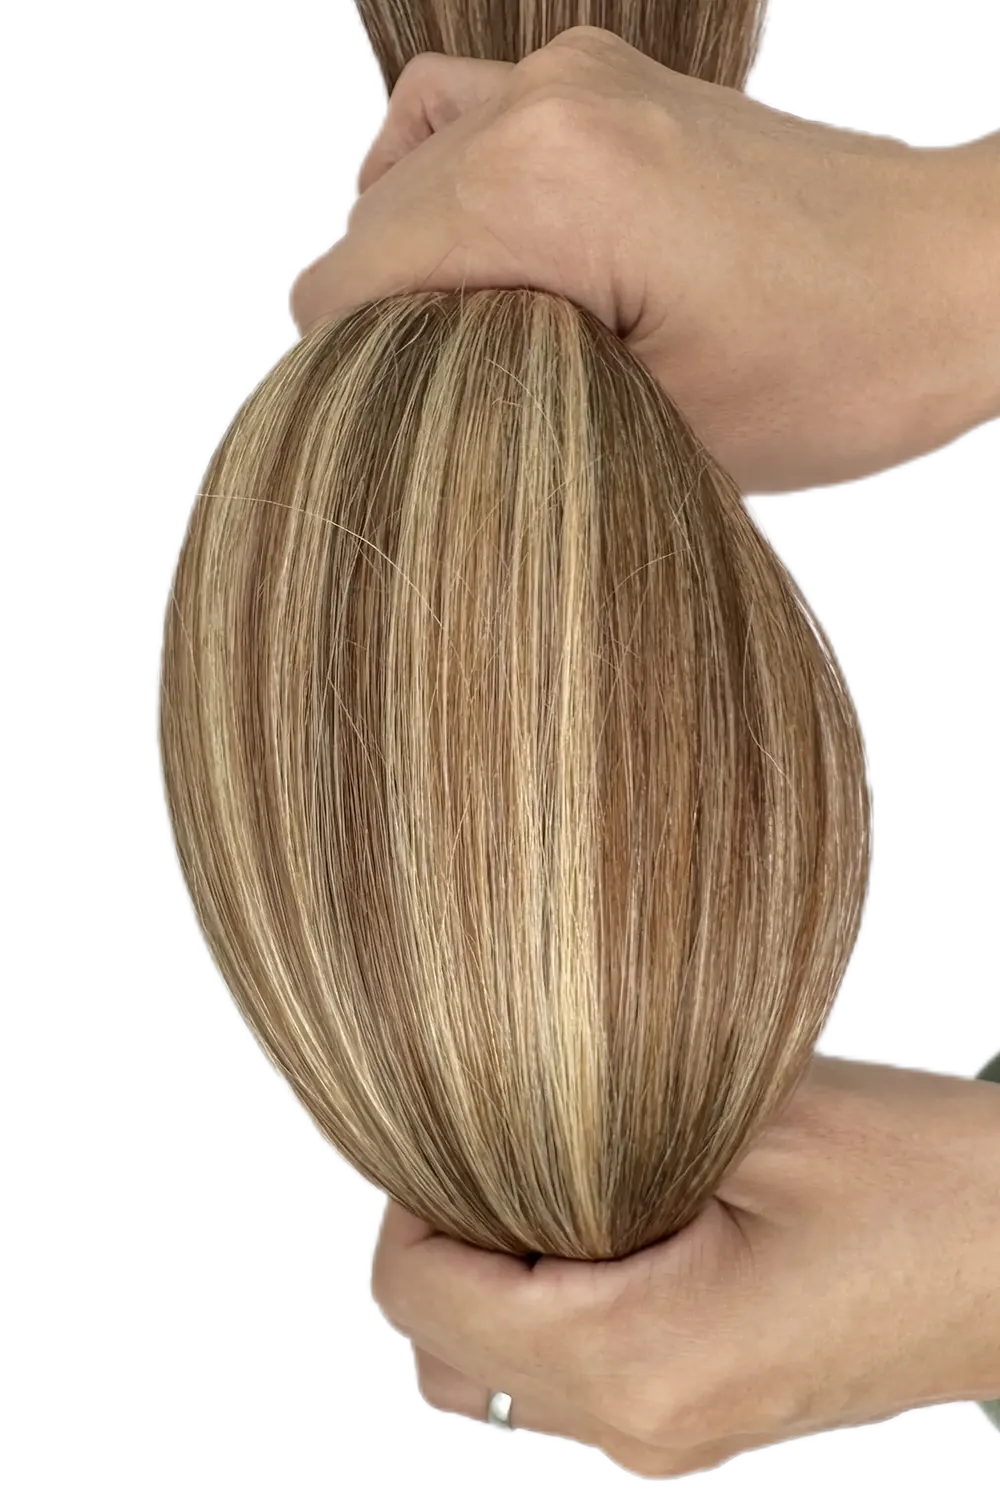 clip-in-human-hair-extensions-brown-with-blonde-highlights-3